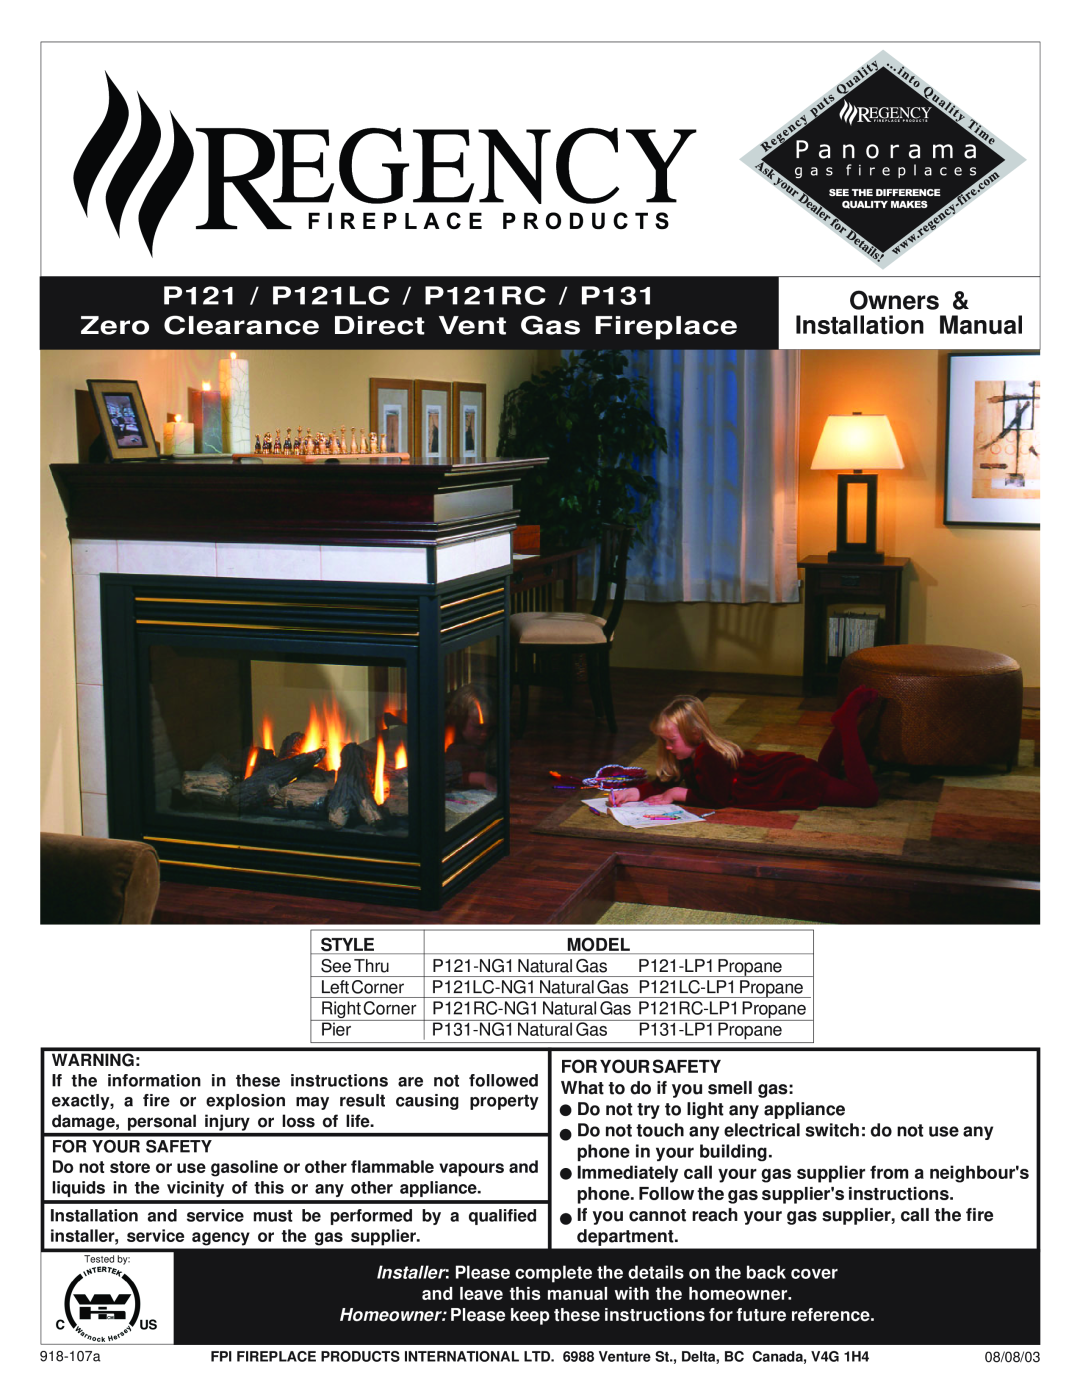 Regency installation manual P121 / P121LC / P121RC / P131, Zero Clearance Direct Vent Gas Fireplace, Owners, Style 